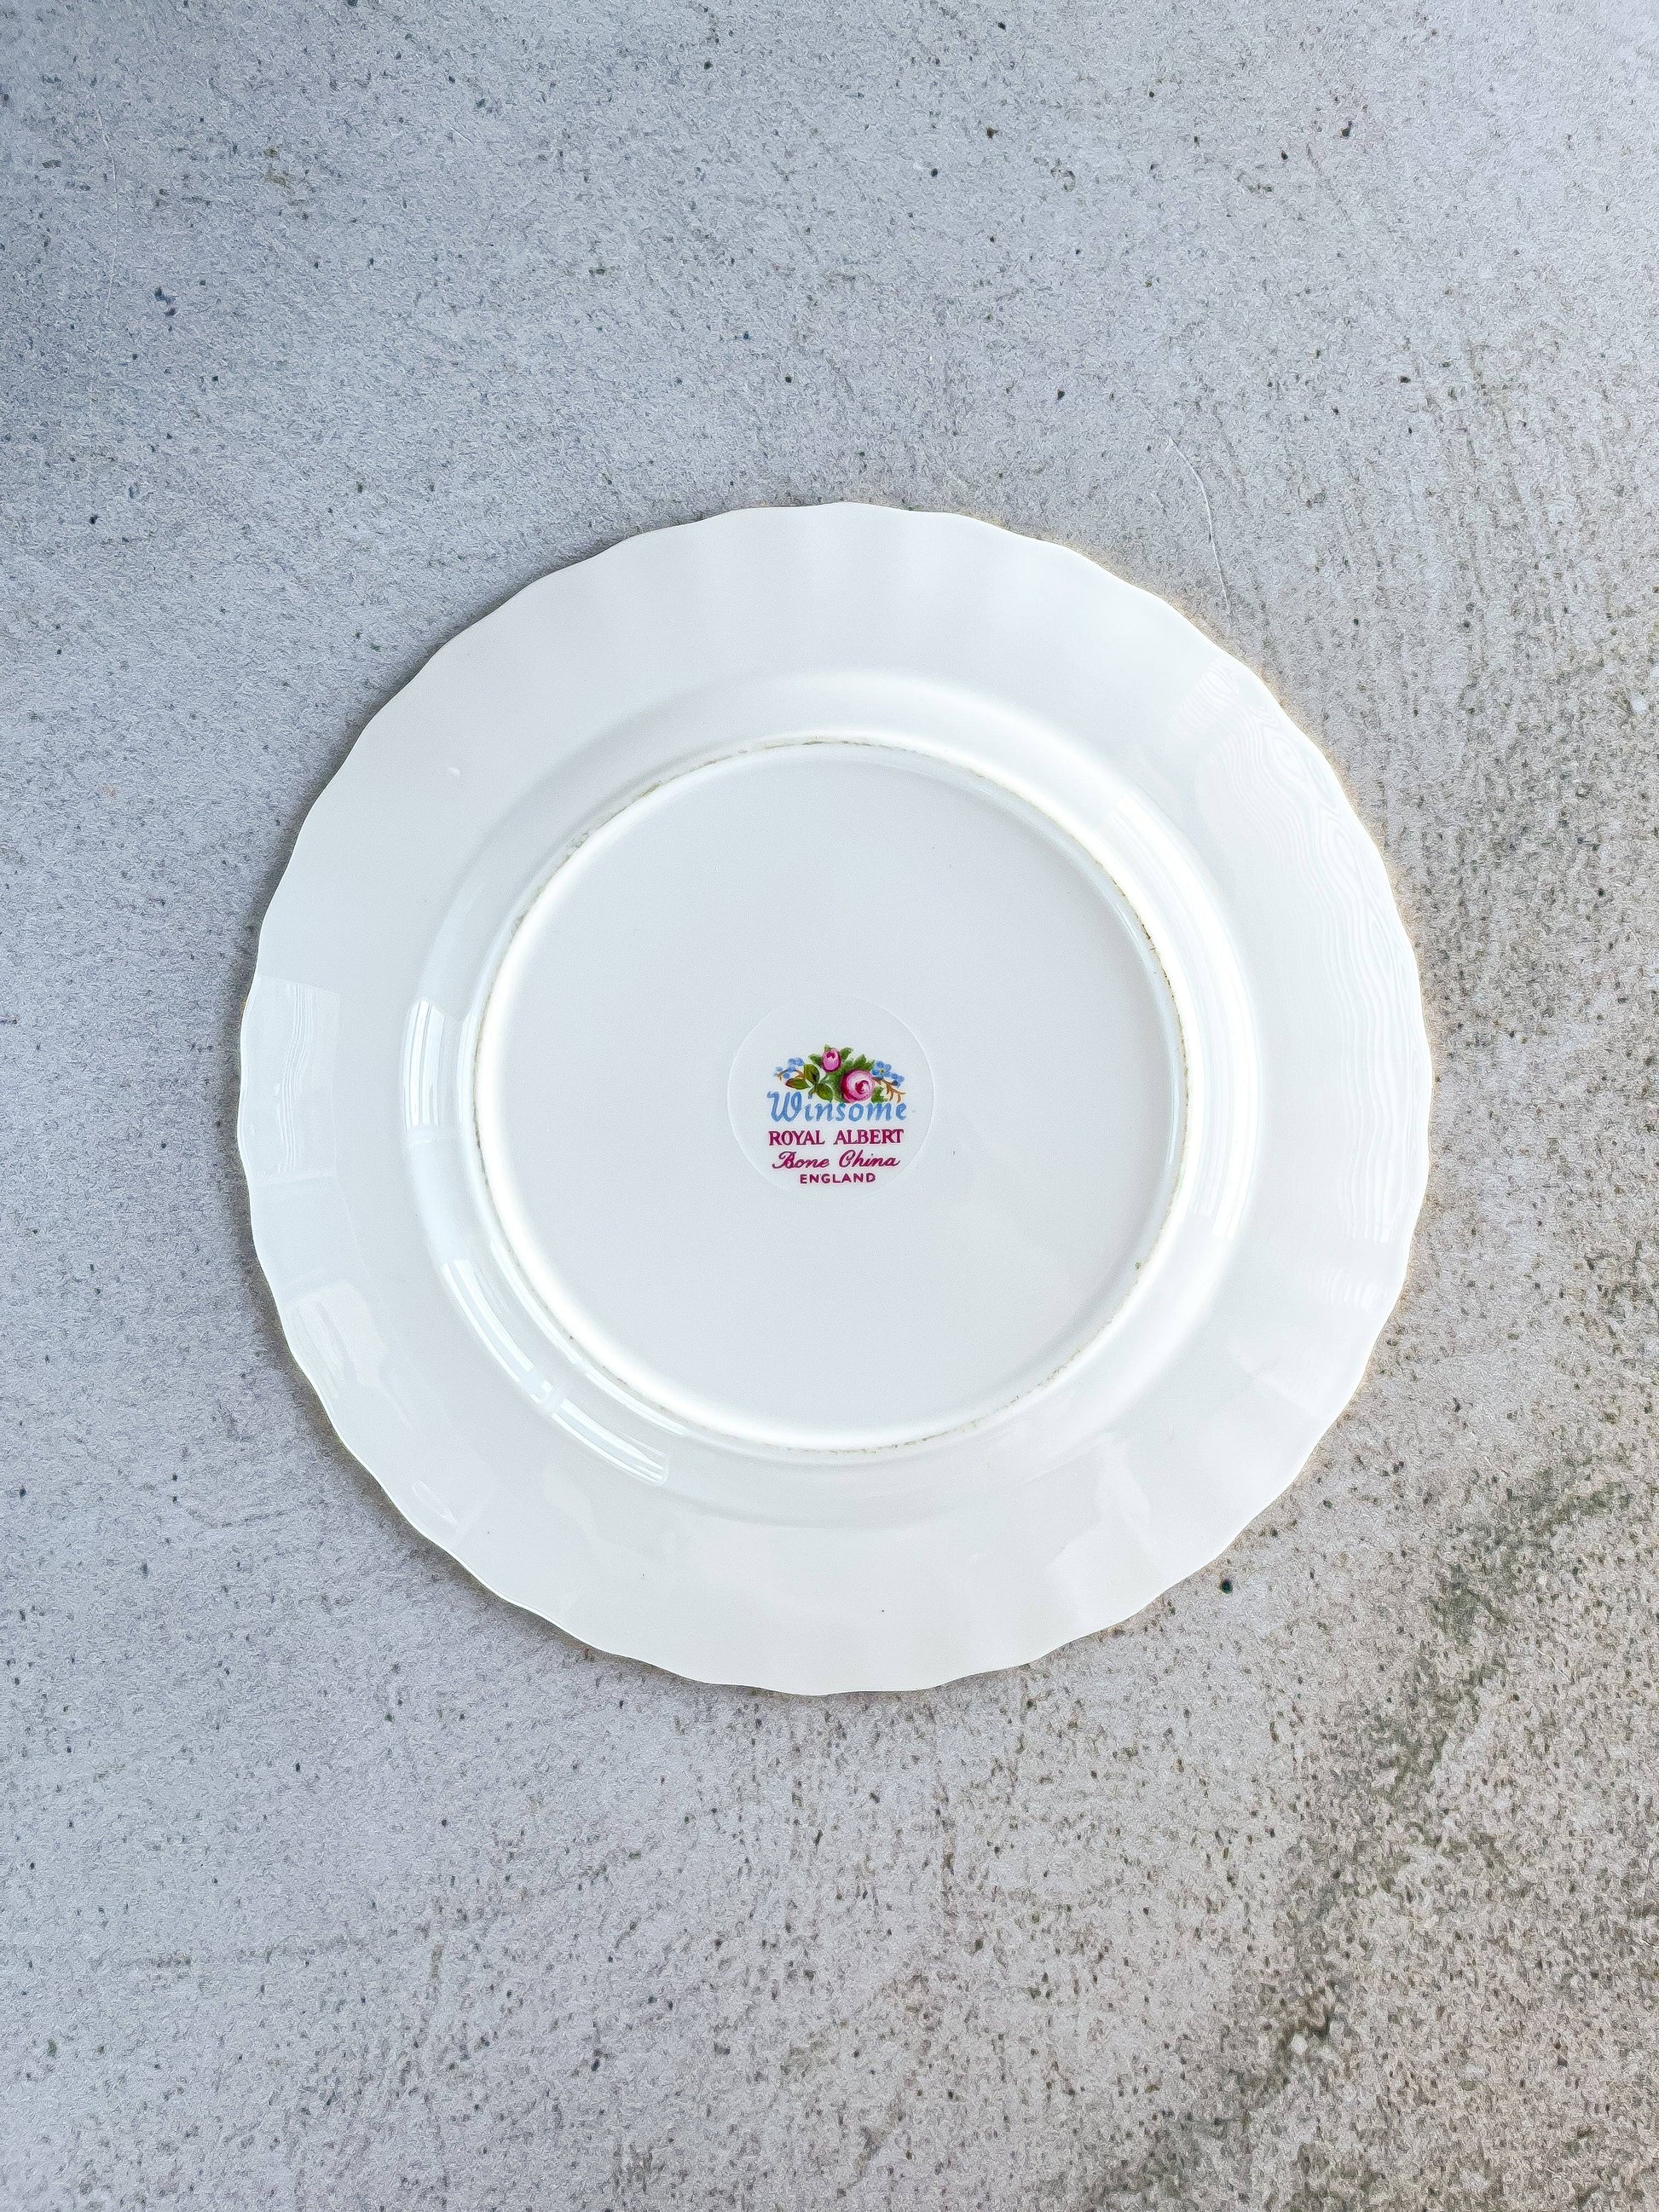 Royal Albert Bread & Butter Plate - ‘Winsome’ Collection - SOSC Home